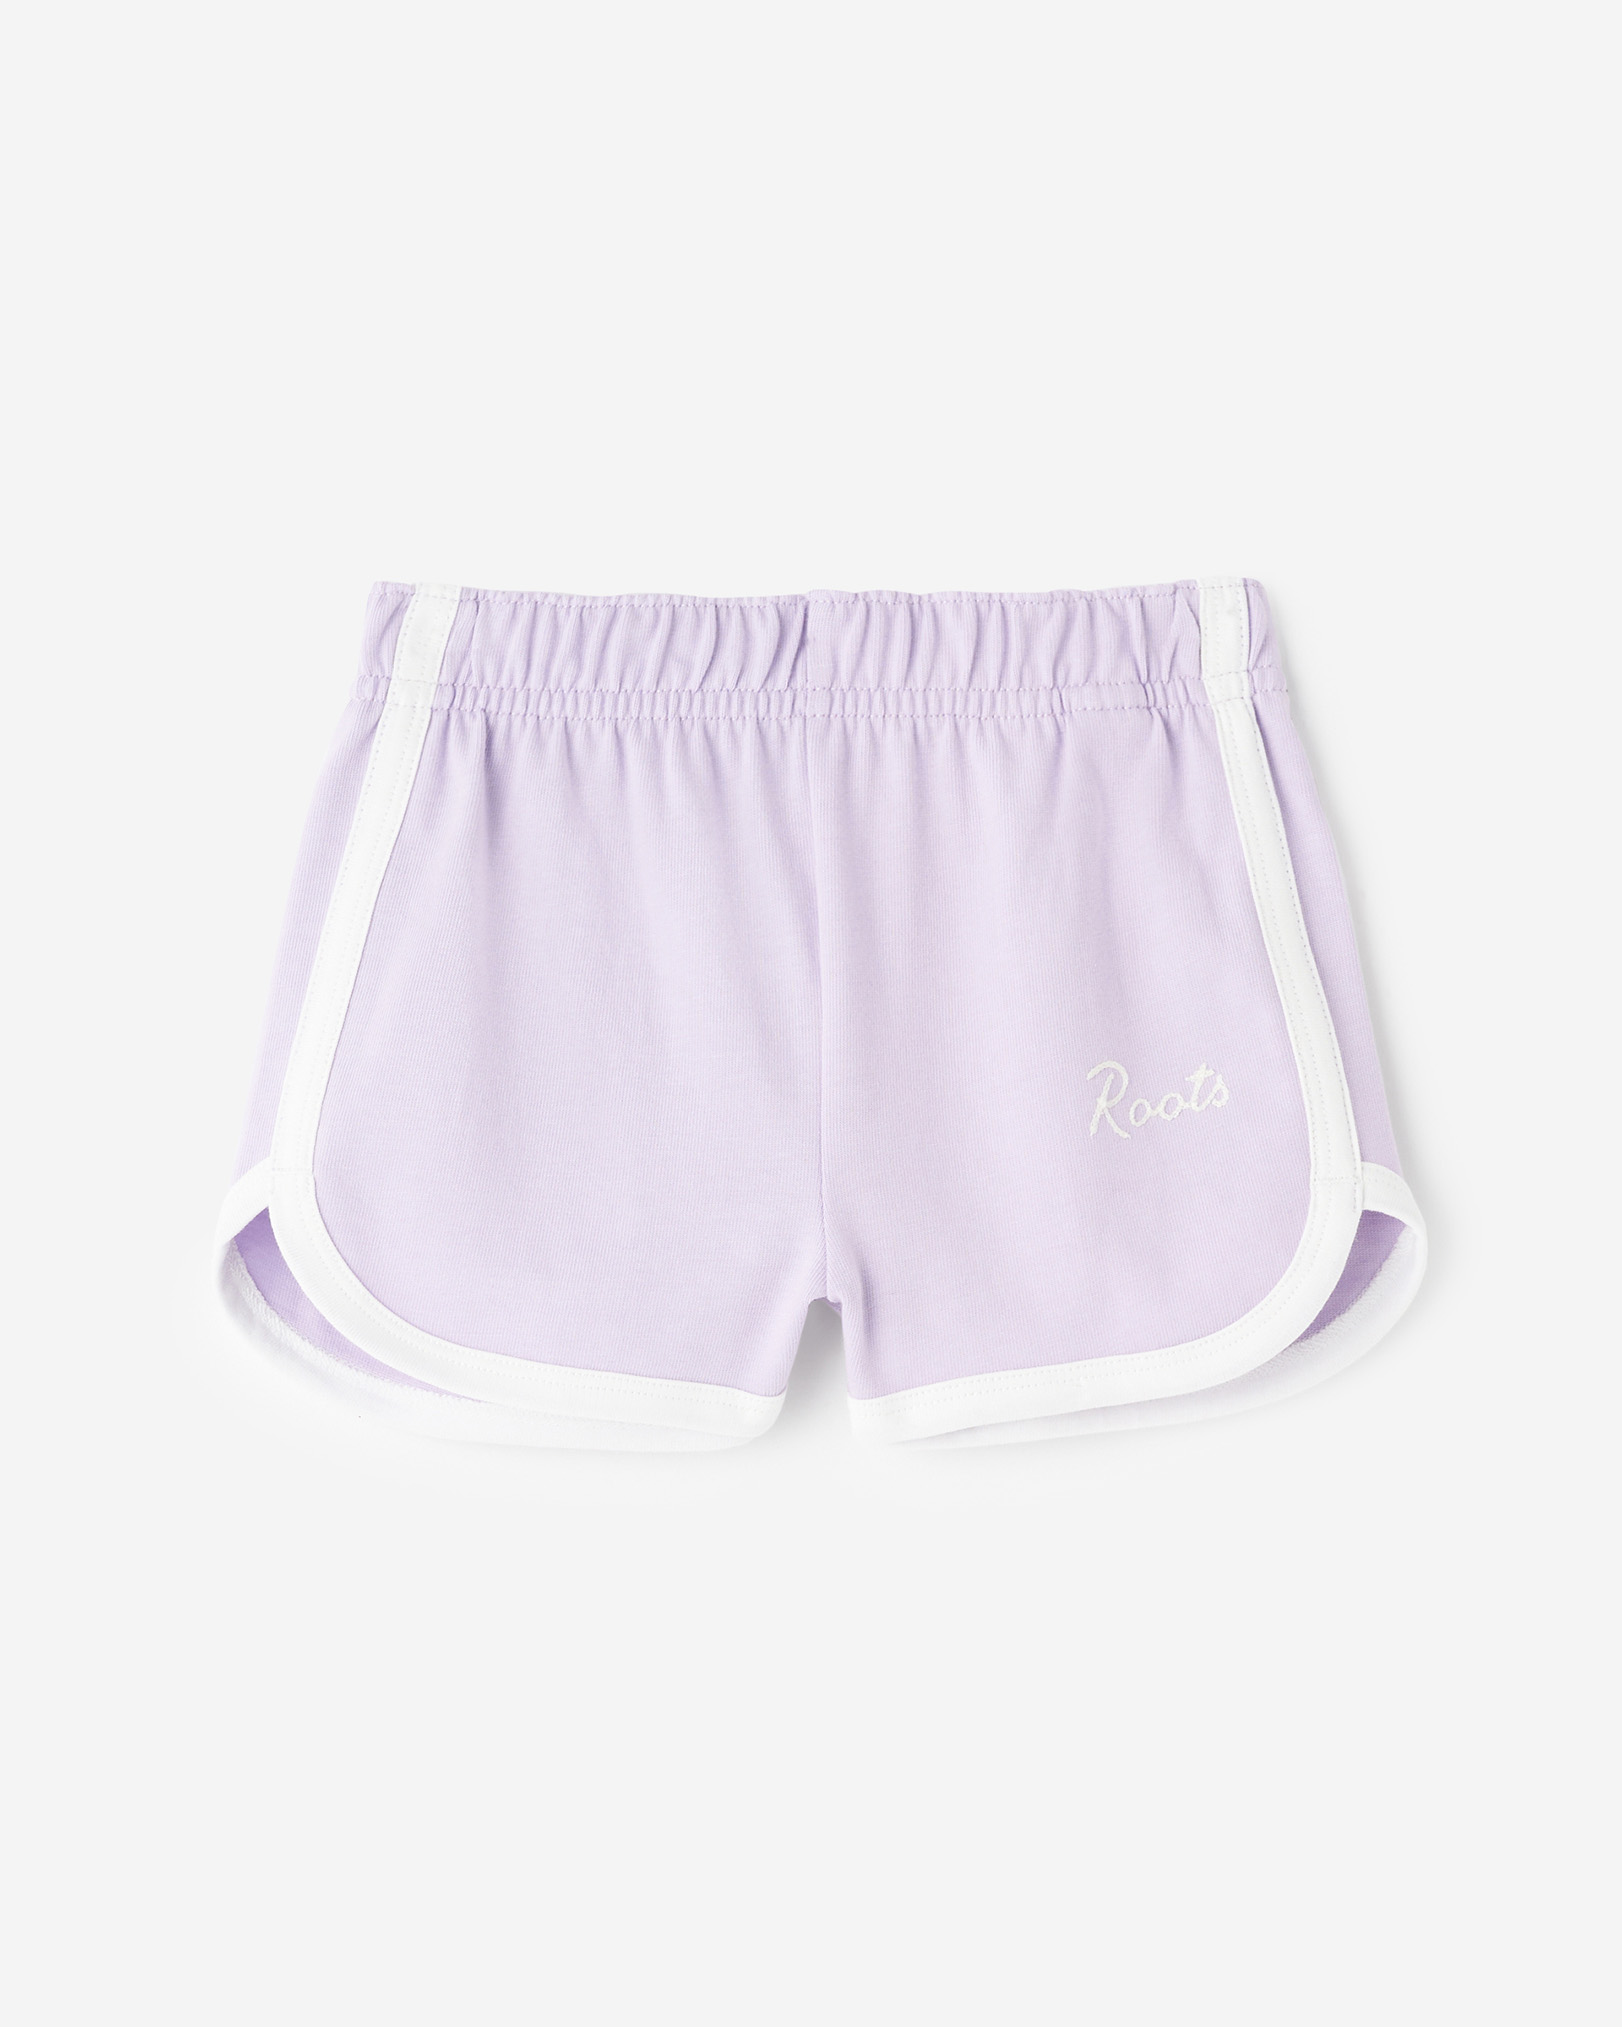 Roots Toddler Girl's Gym Short in Orchid Petal